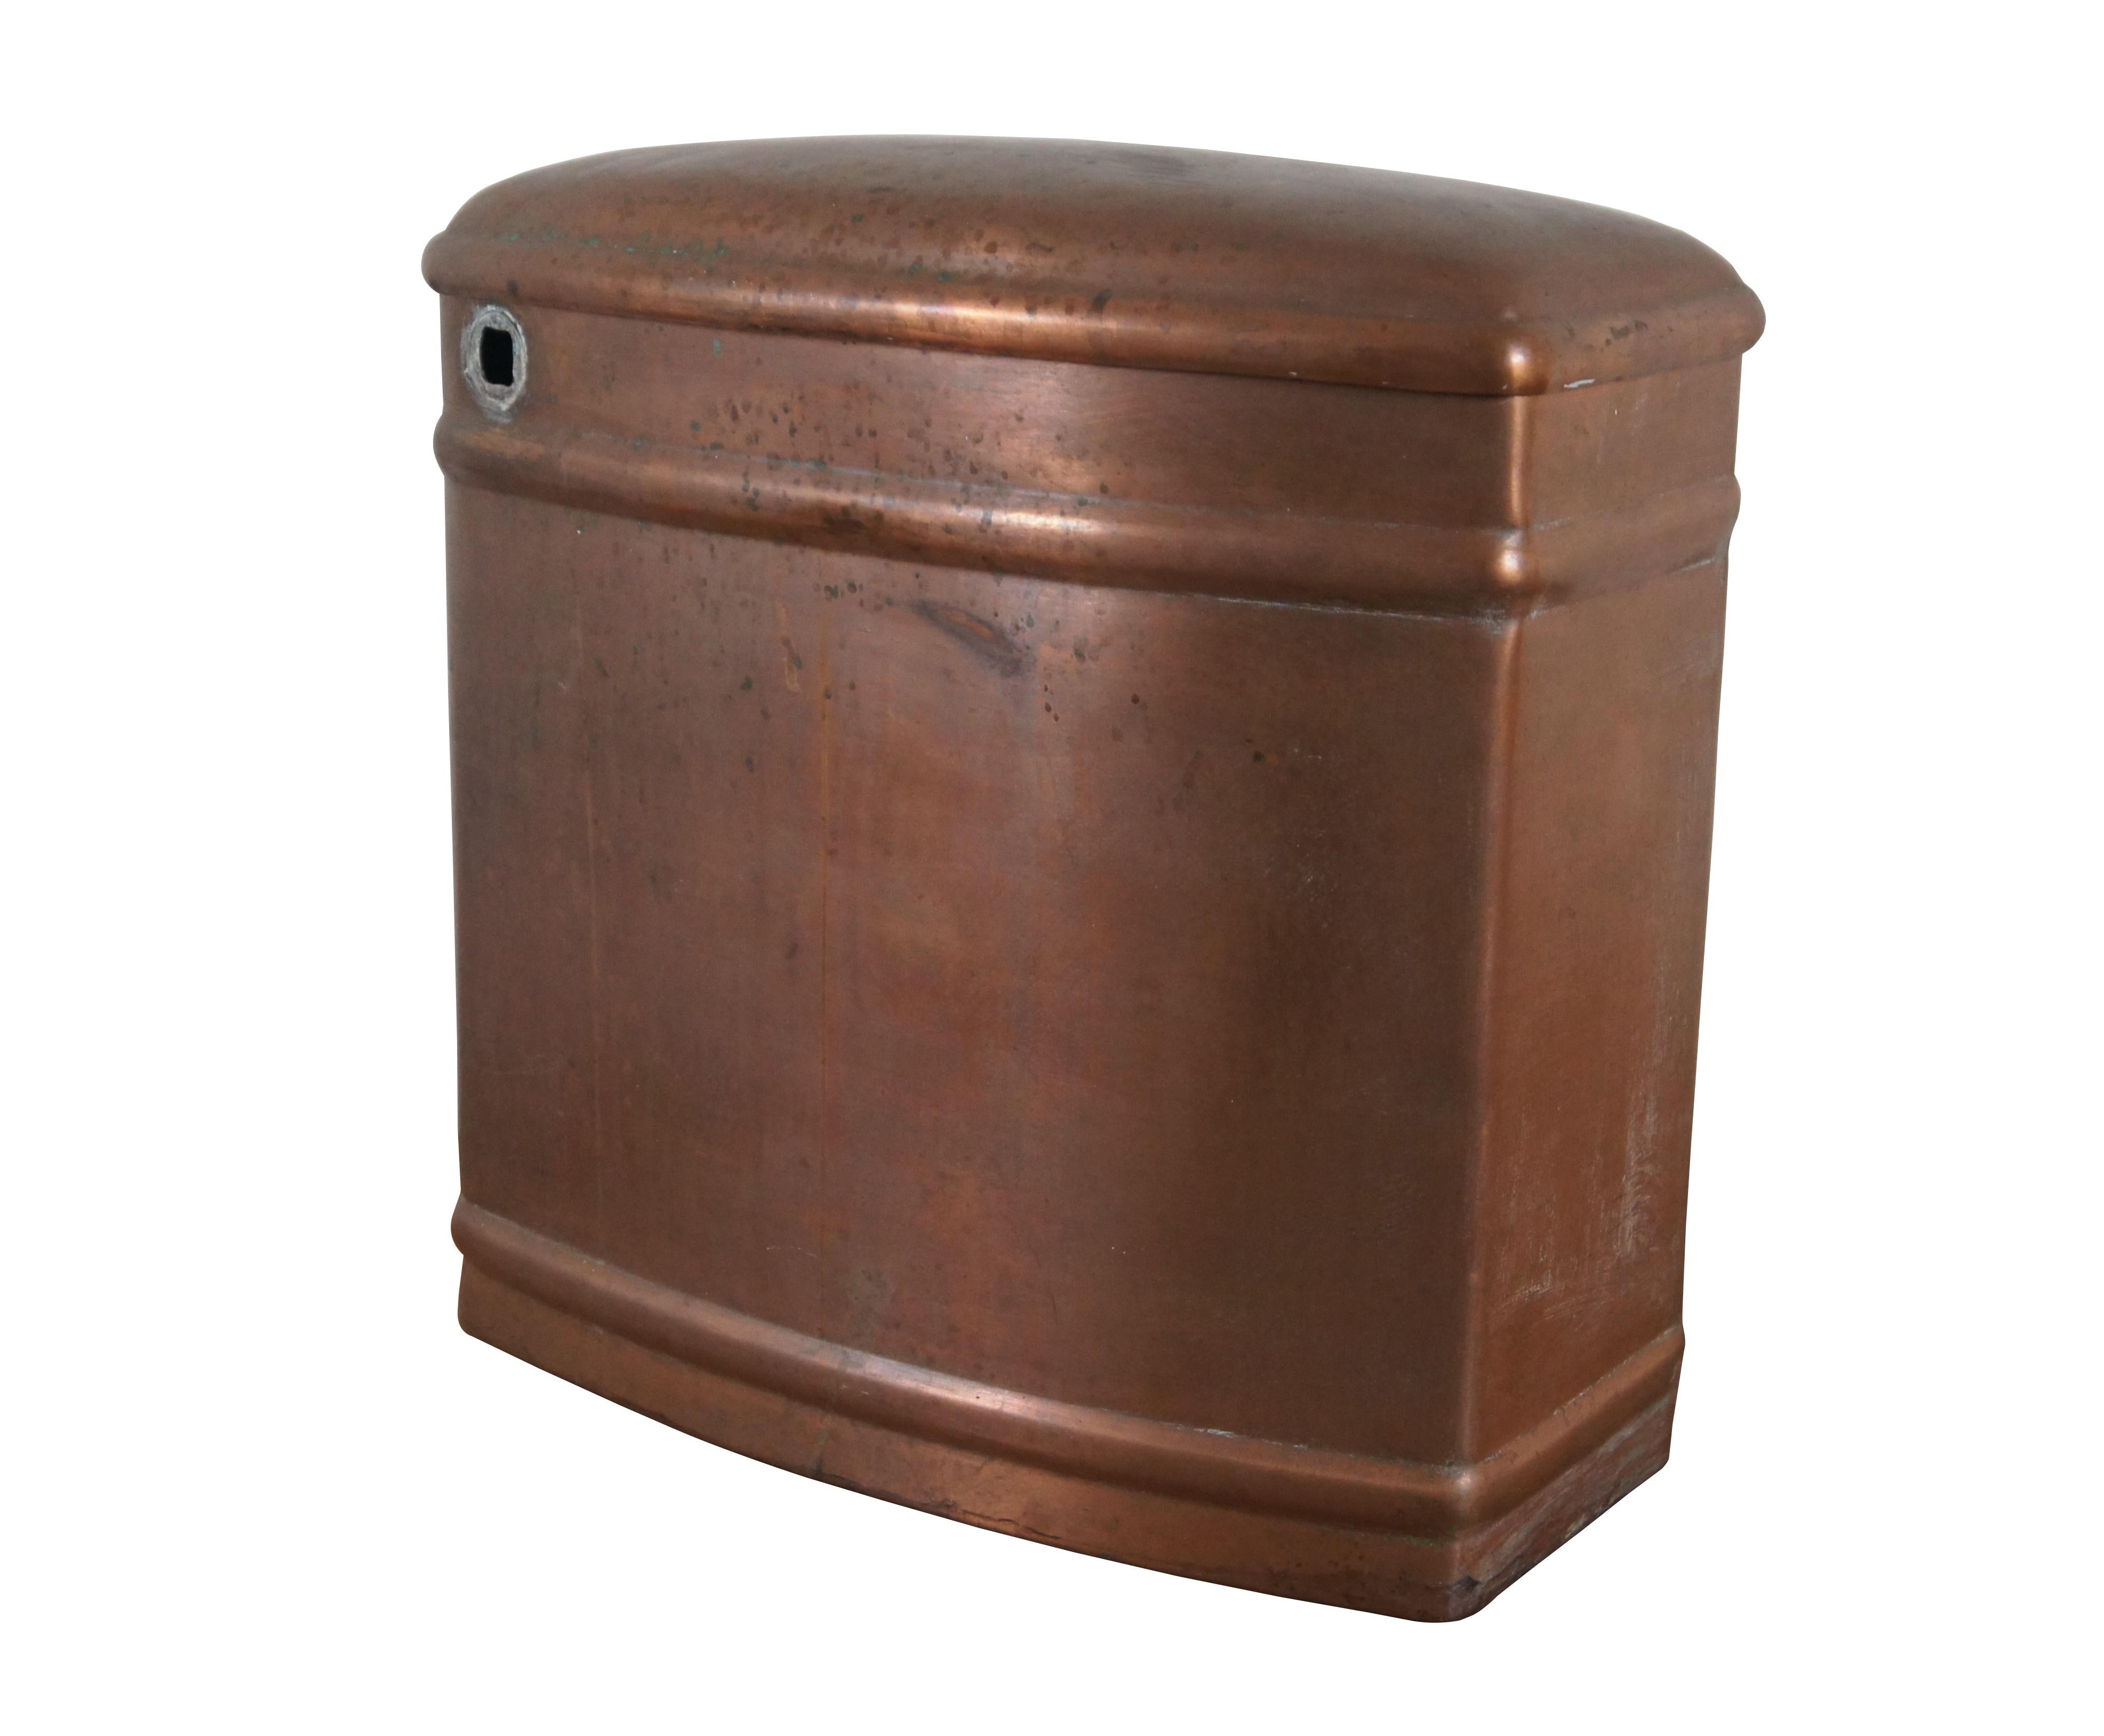 Late Victorian antique copper toilet tank by White-Copper. Made from 24 ounce copper. Includes brass / white porcelain handle / flush lever by AAB Co.

Dimensions:
15.5